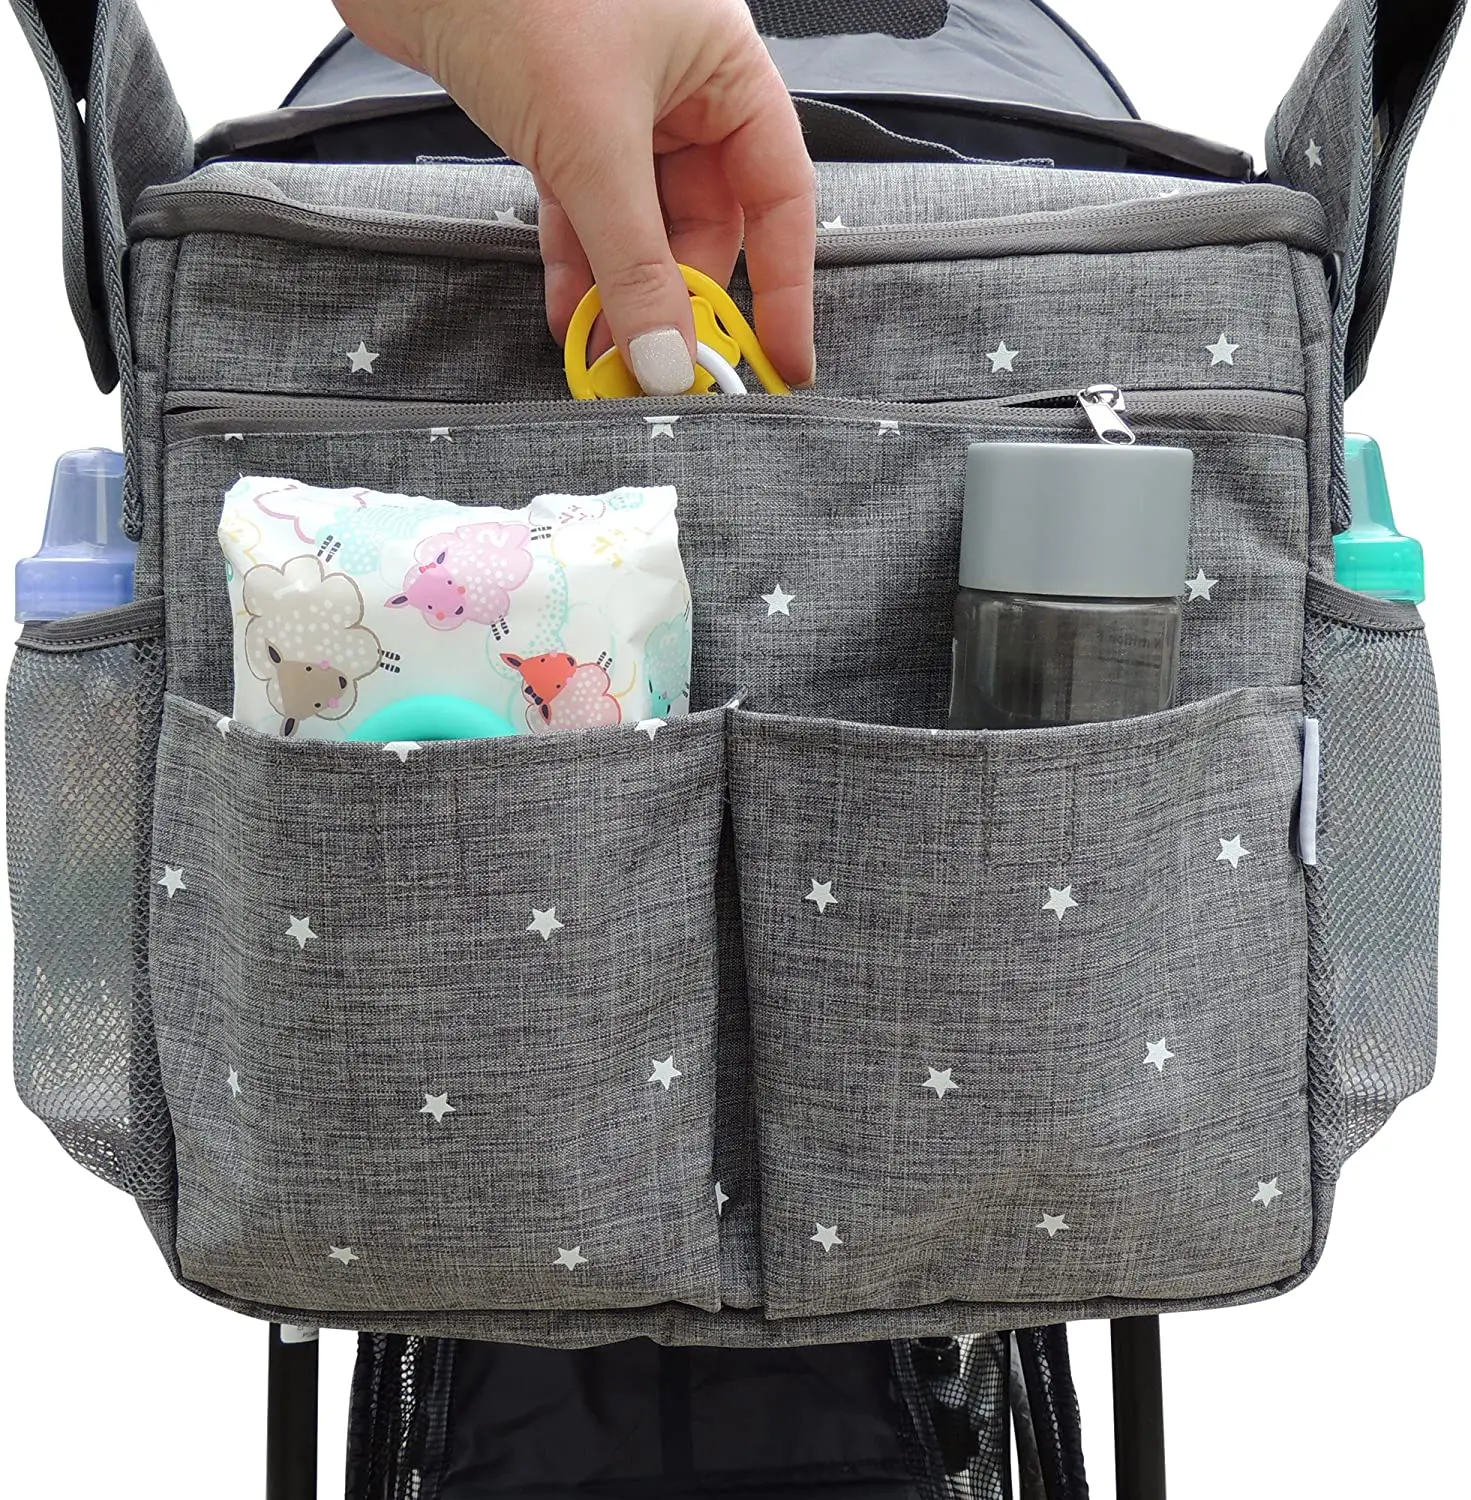 Universal Kids Jogger Stroller Organizer Bag/Diaper Bag with Cup Holders and Shoulder Strap by SKYNEW,Light Grey 